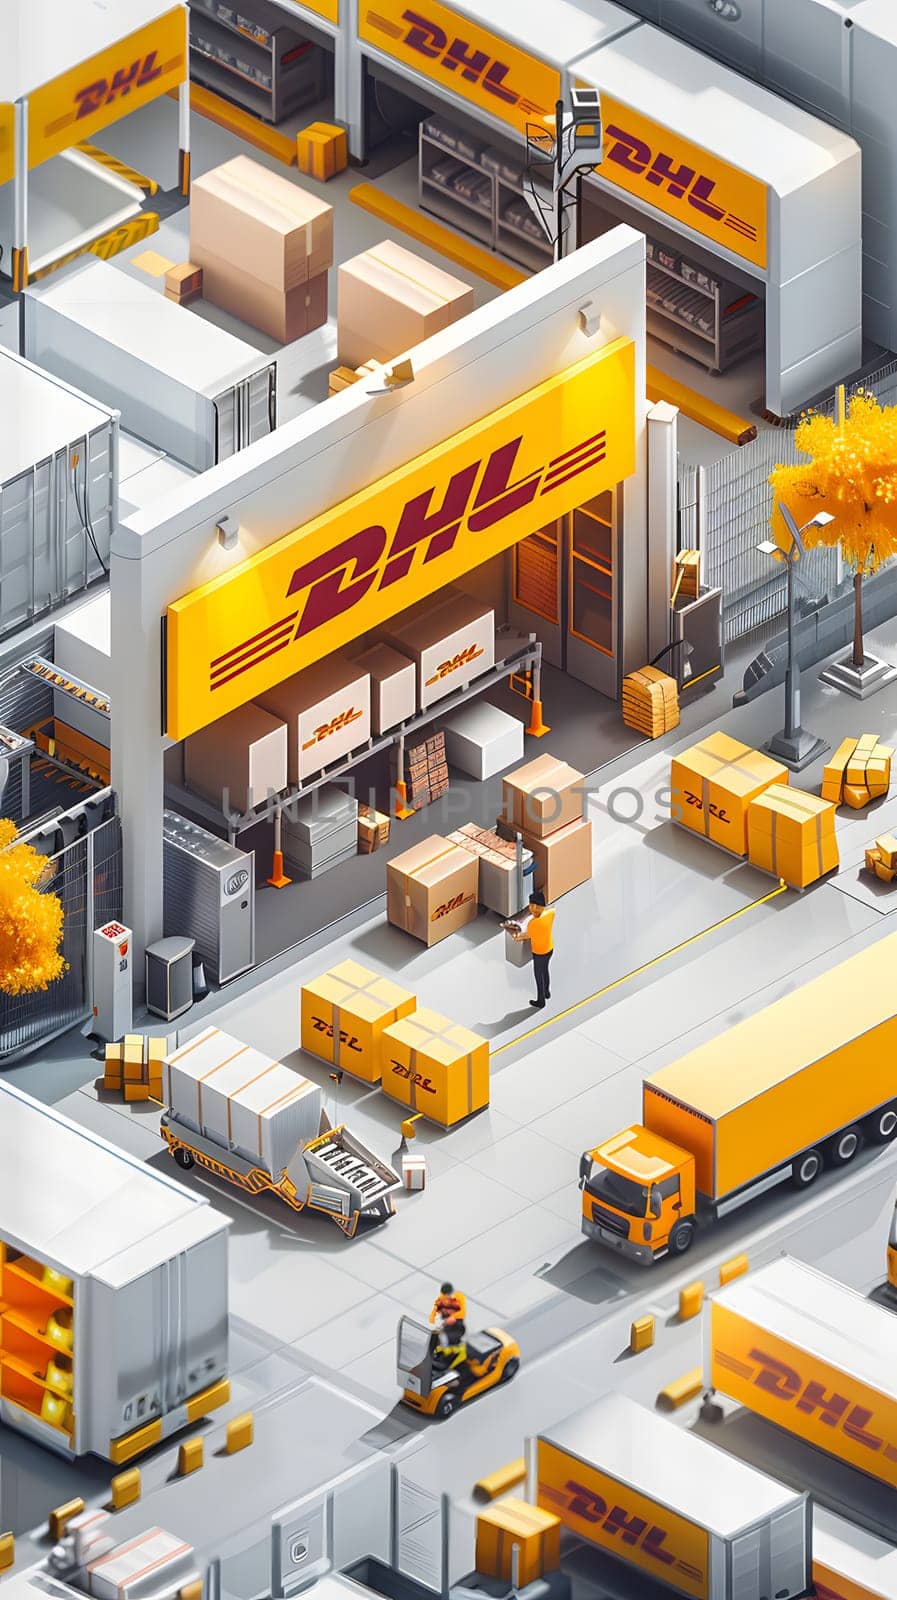 Isometric view of a DHL warehouse with yellow trucks and boxes by Nadtochiy